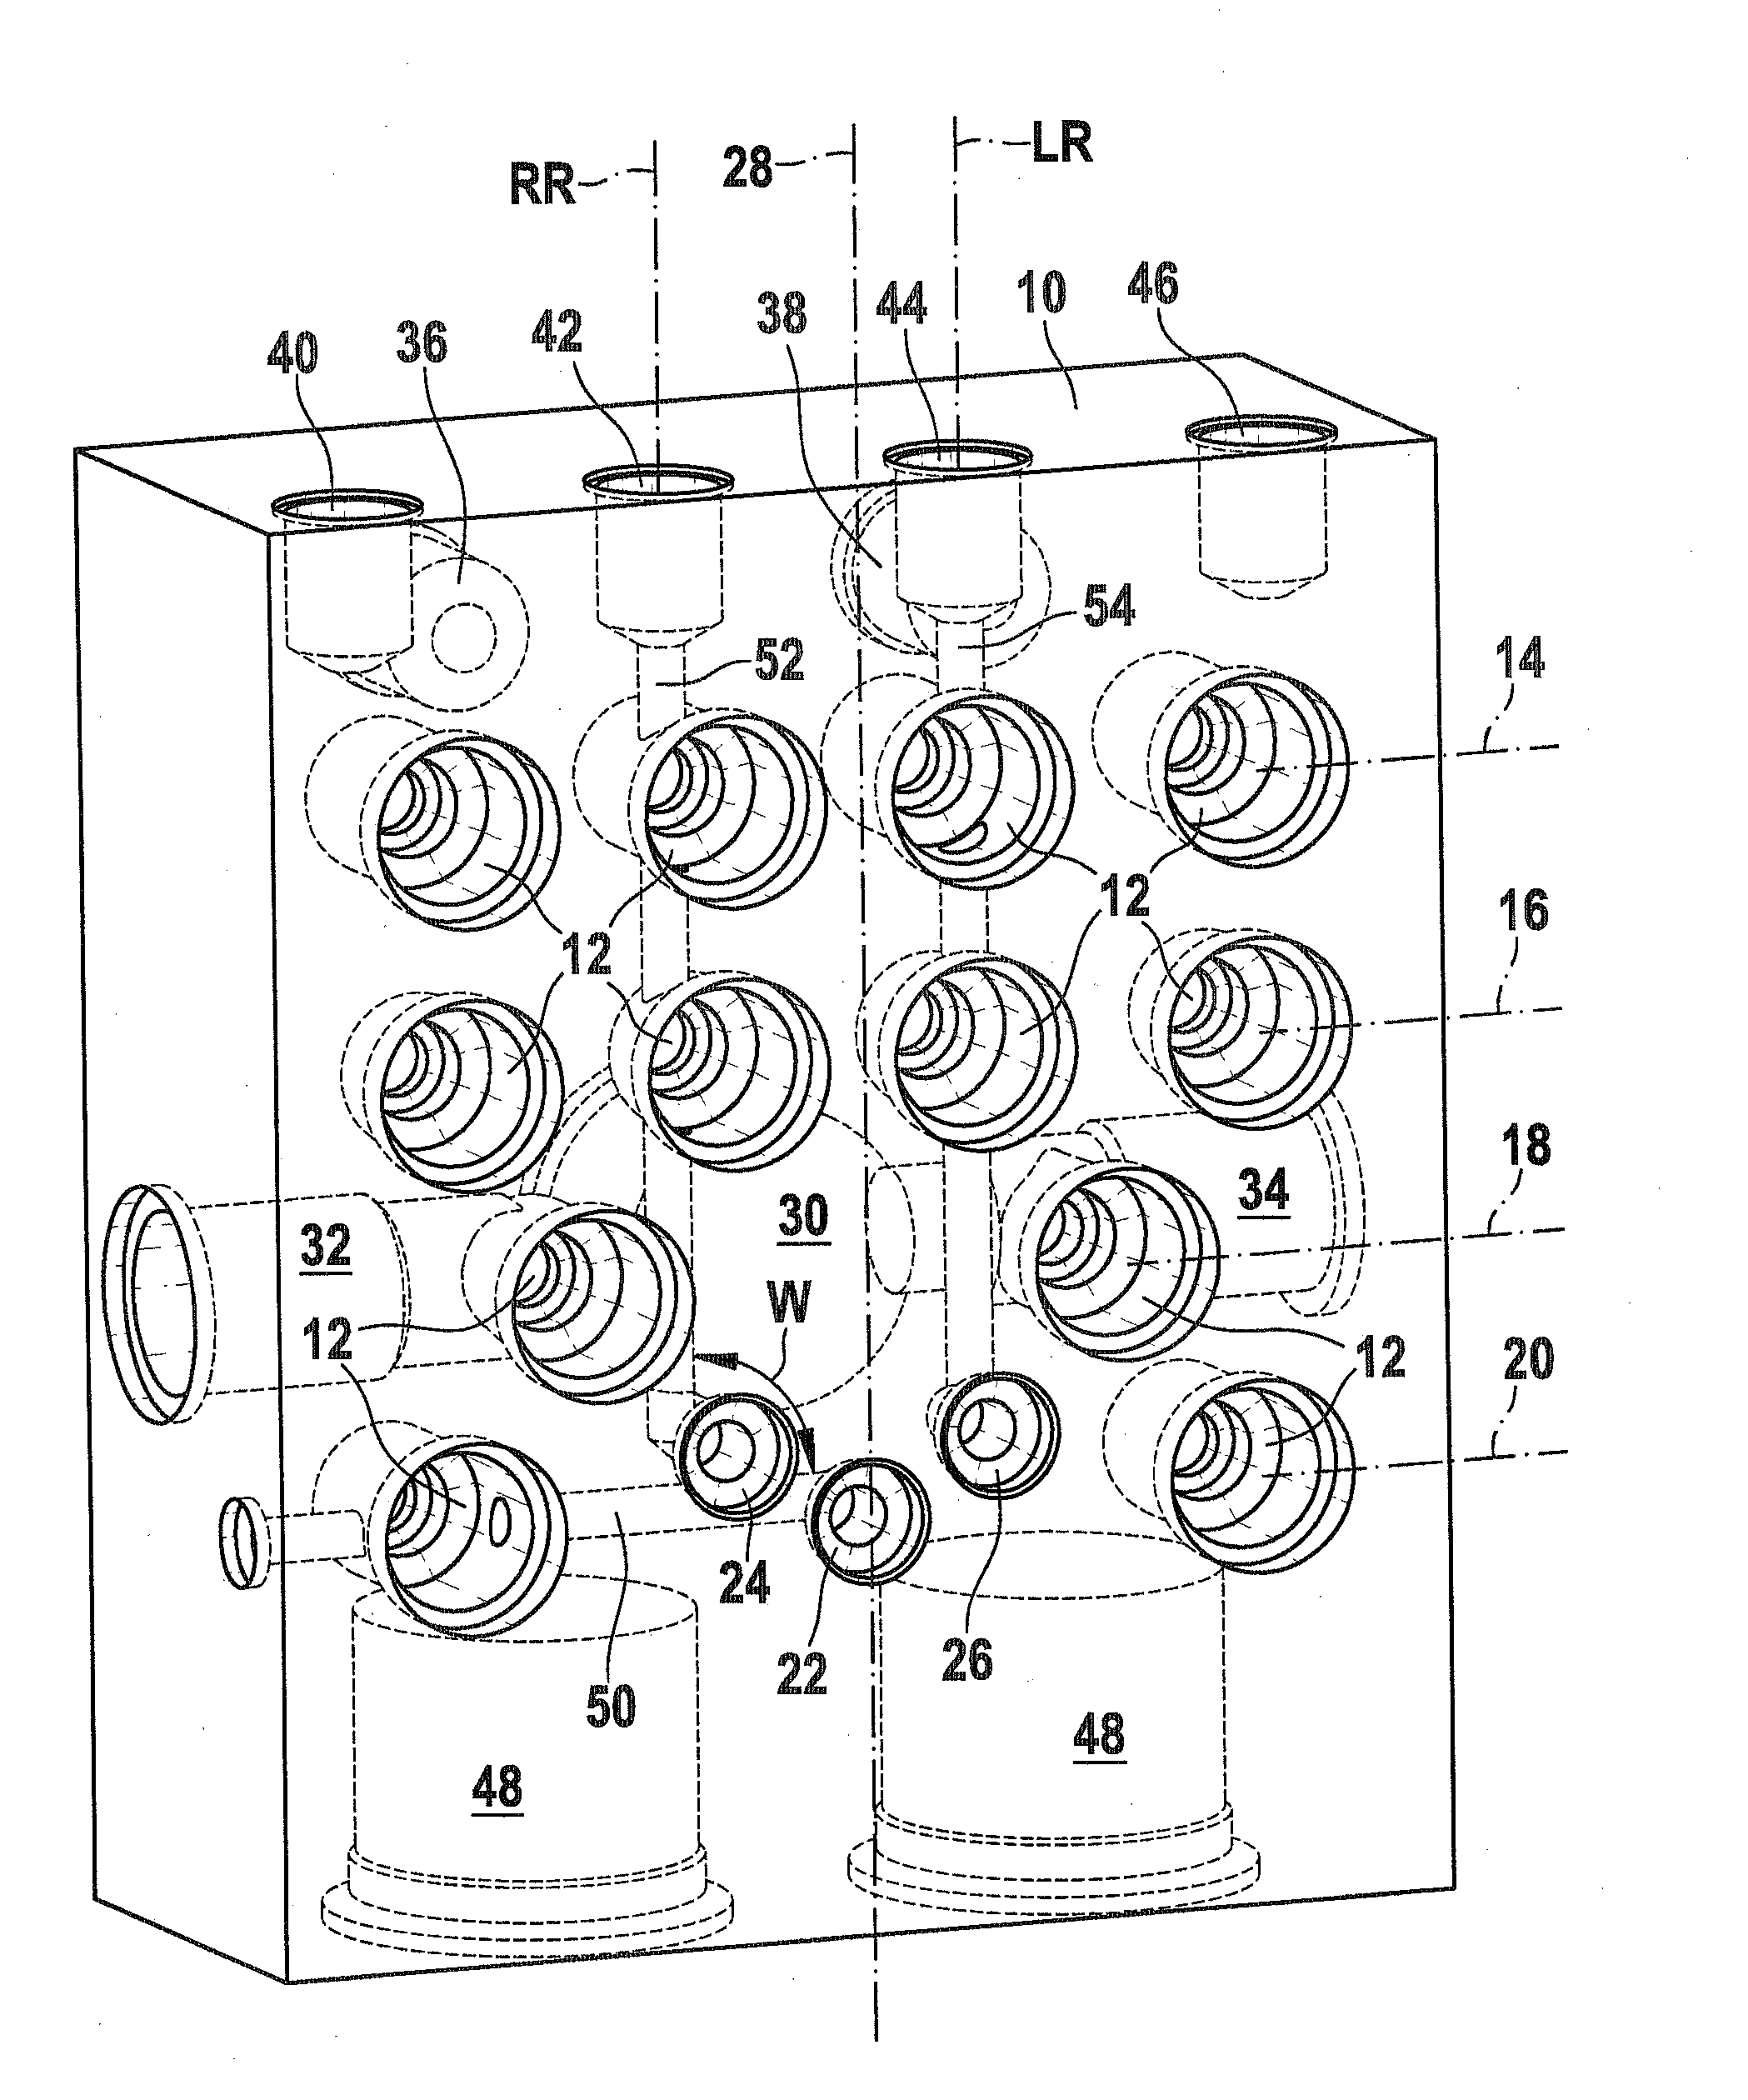 Hydraulic assembly for a hydraulic vehicle brake system with traction control